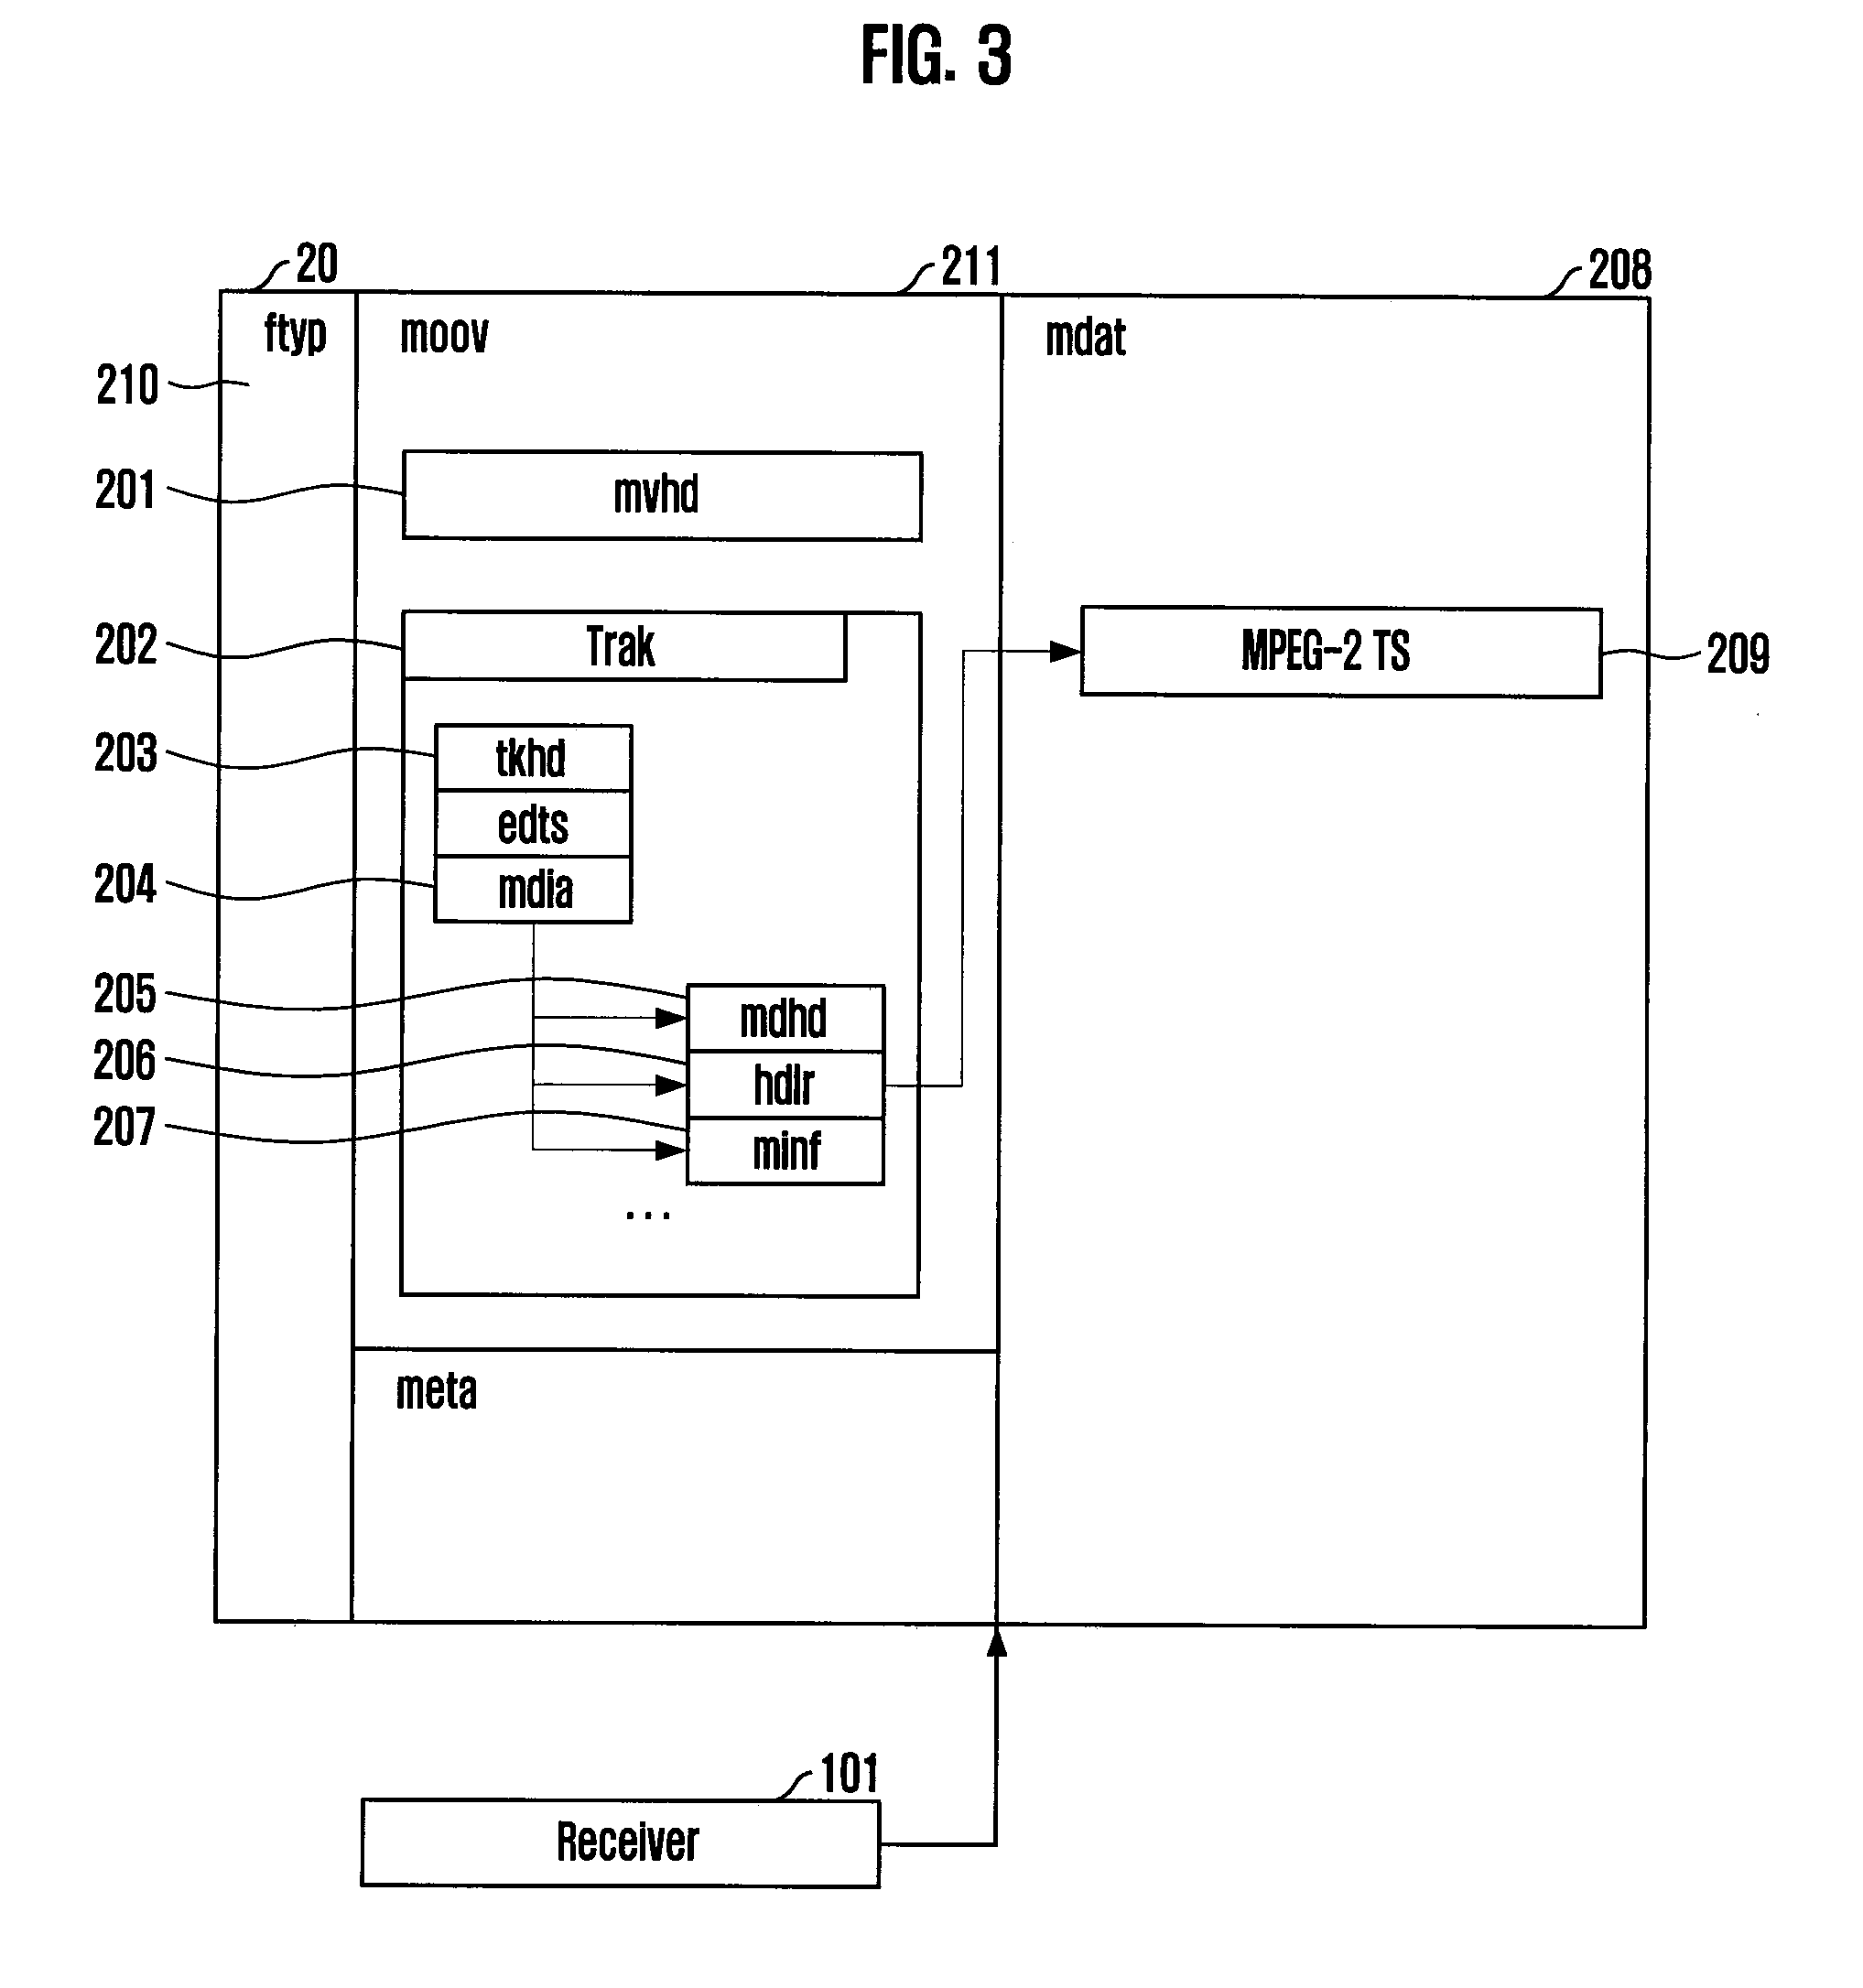 Storage/playback method and apparatus for mpeg-2 transport stream based on iso base media file format